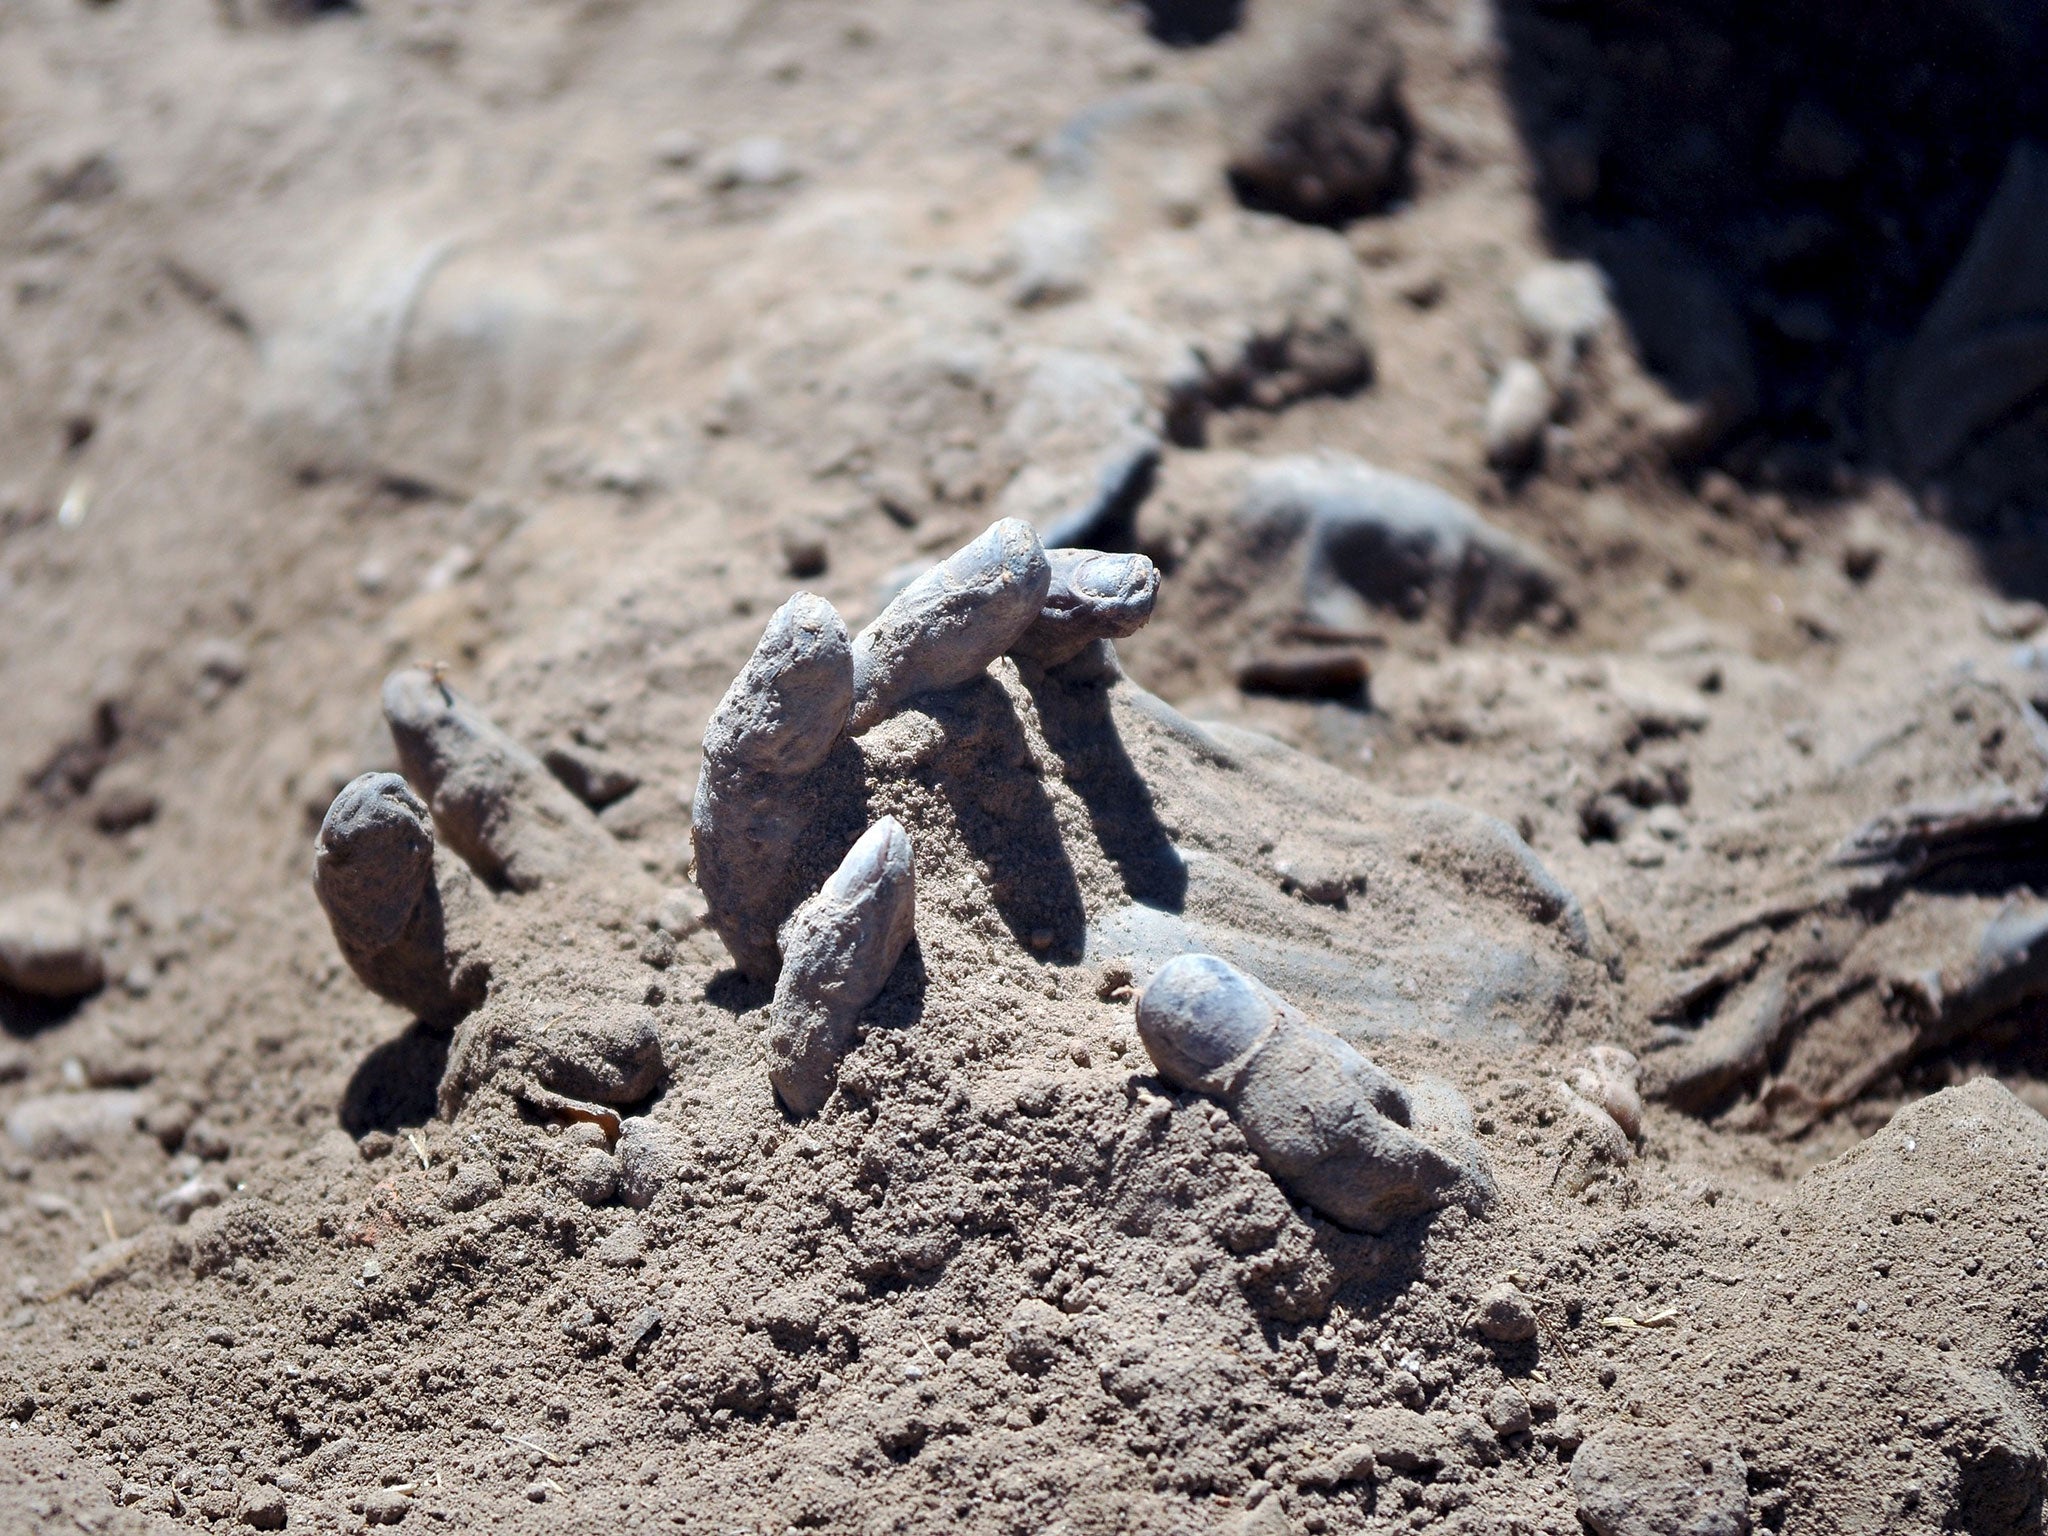 A hand is seen as Iraqi forensic teams recovered dead bodies from a mass grave